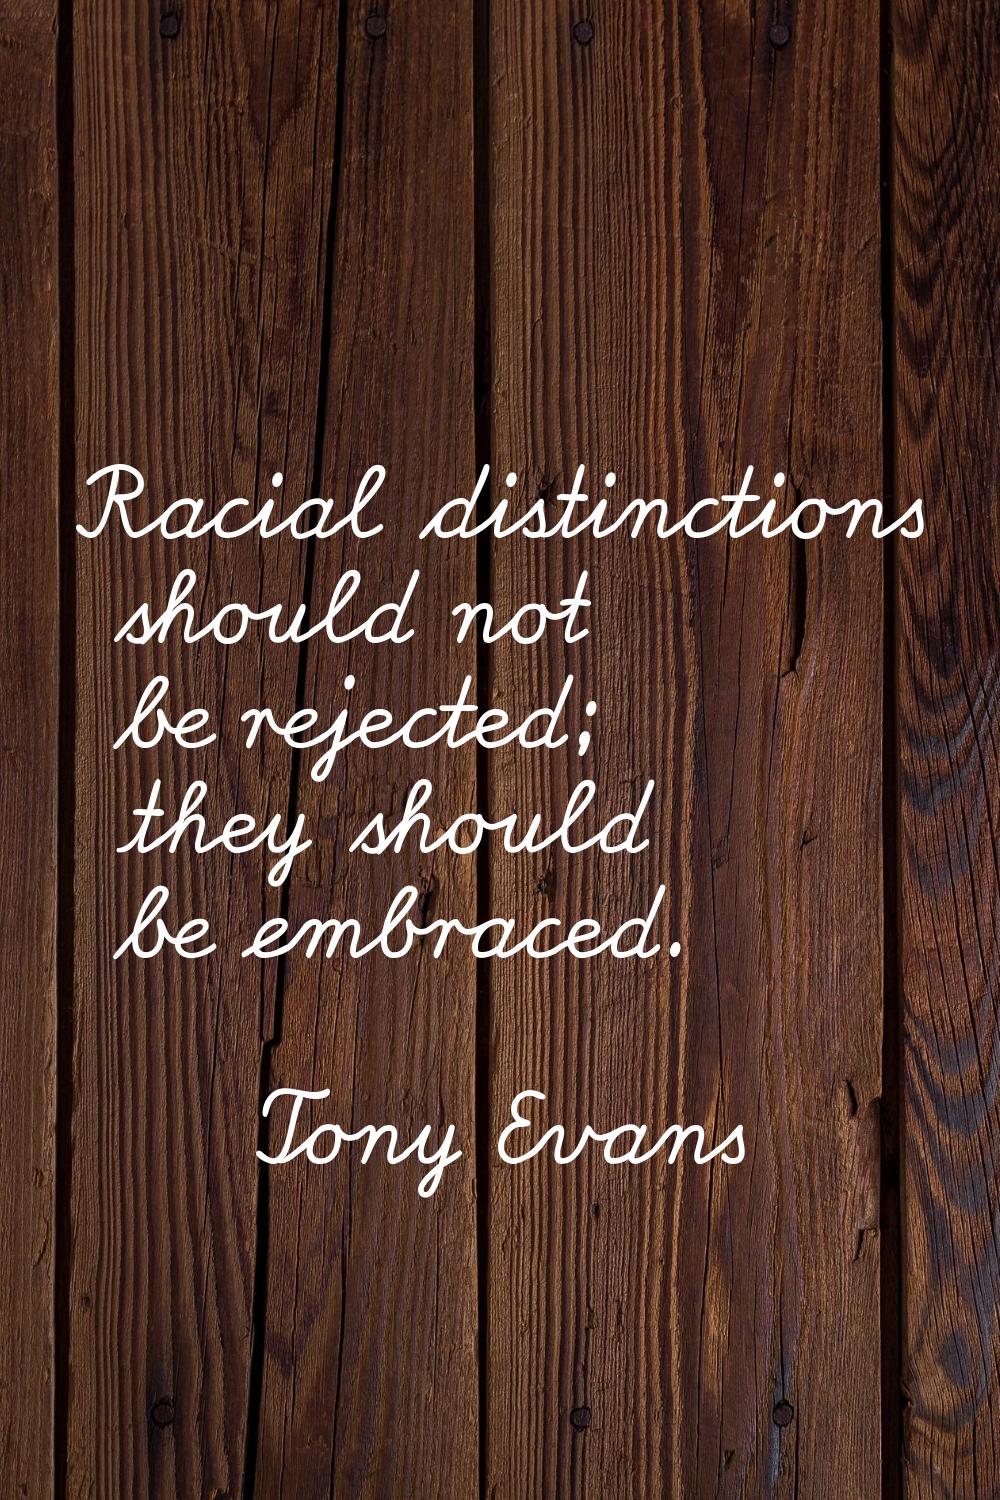 Racial distinctions should not be rejected; they should be embraced.